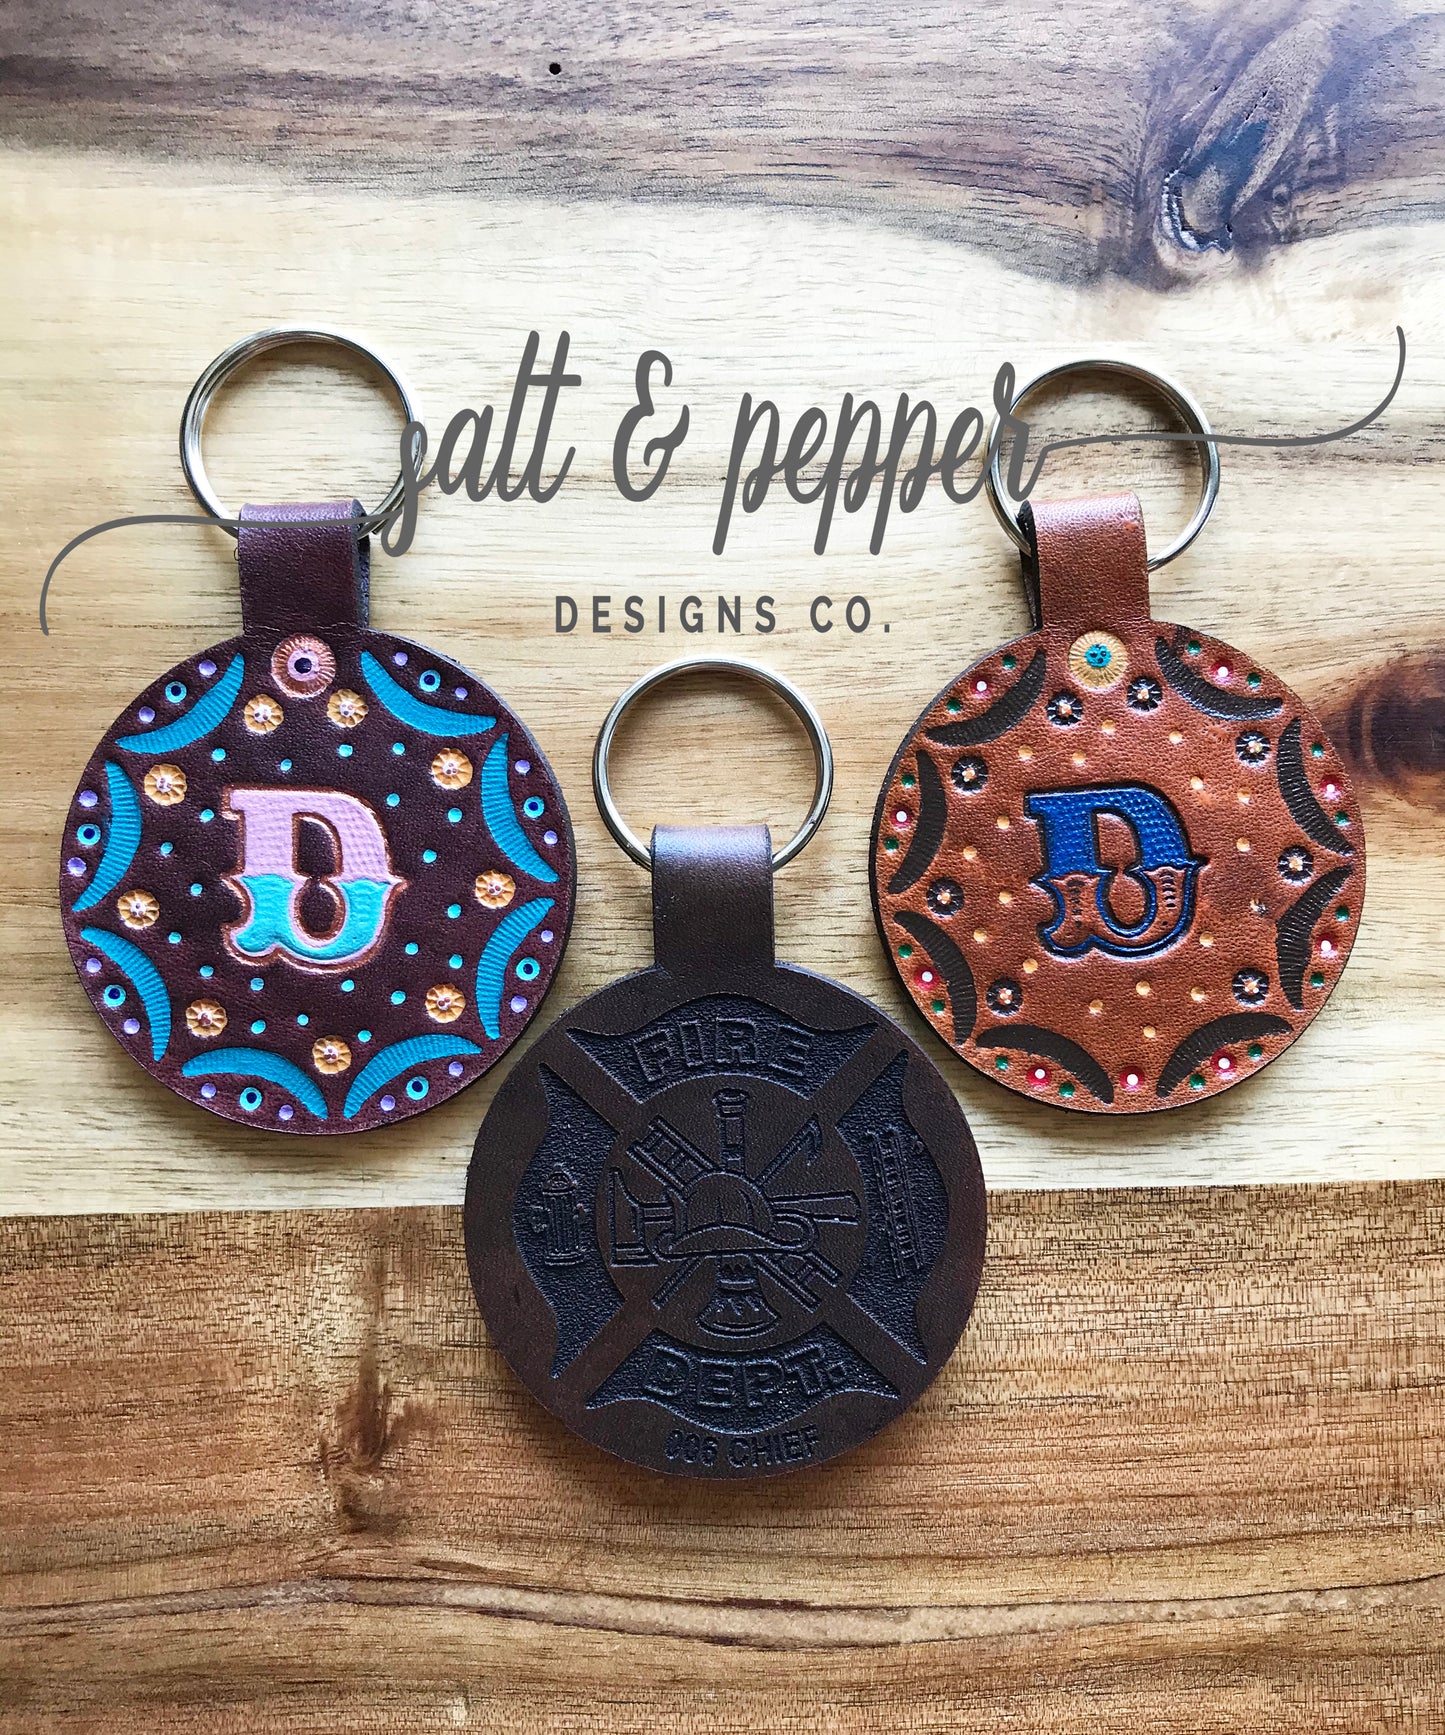 PD & FD Leather Key Chain